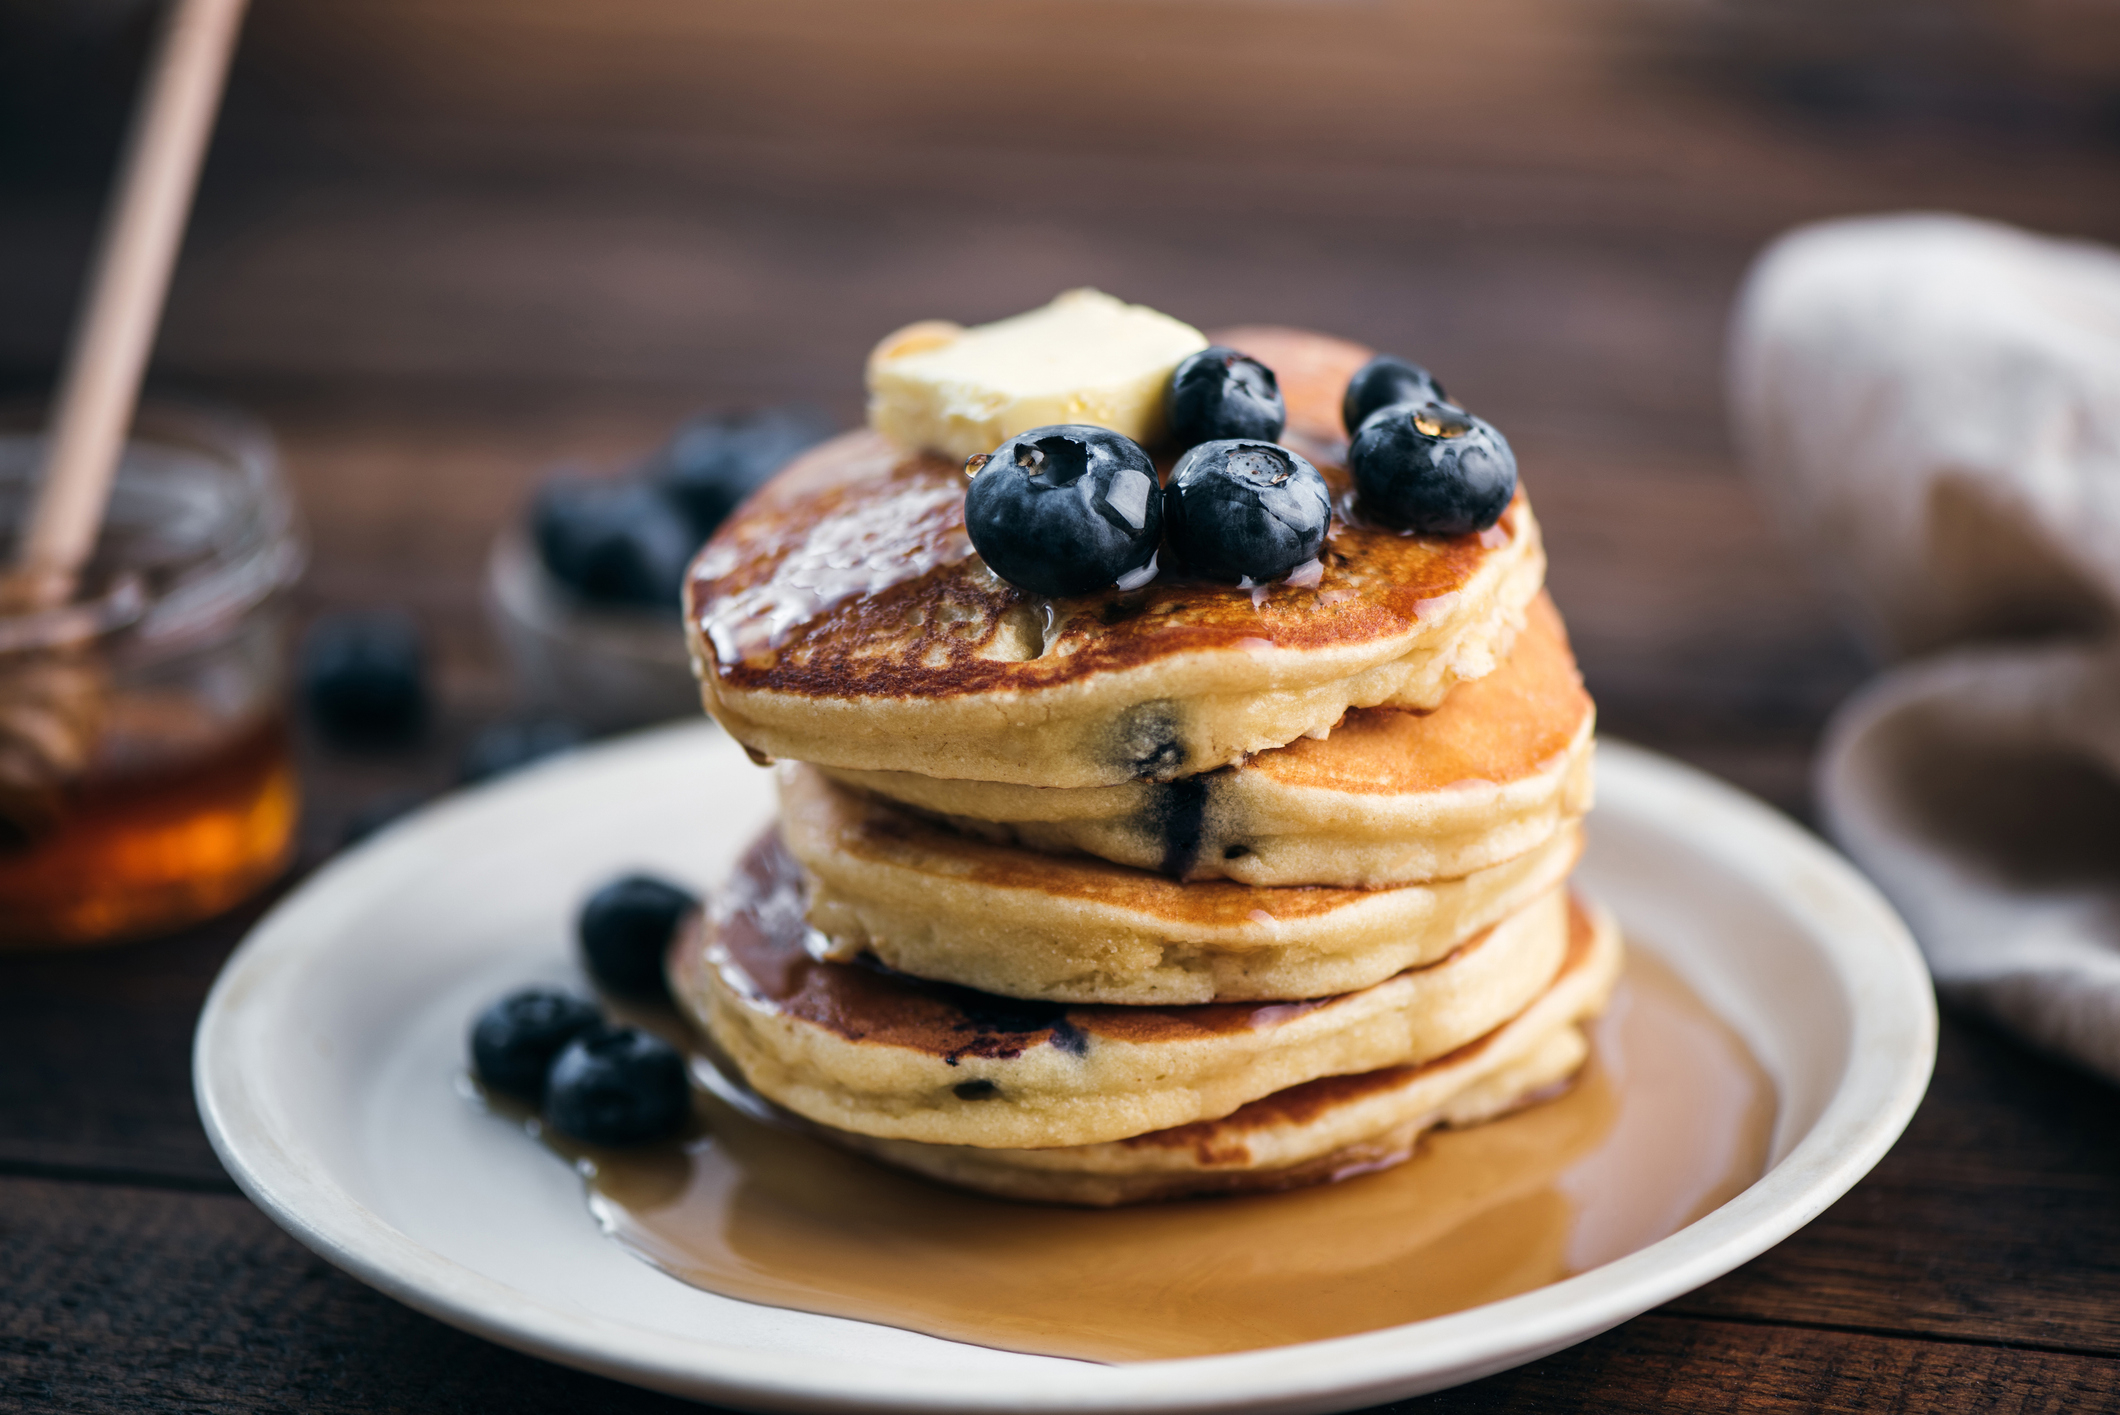 Stack of pancakes with blueberries and a pat of butter, honey on side, on a wooden surface